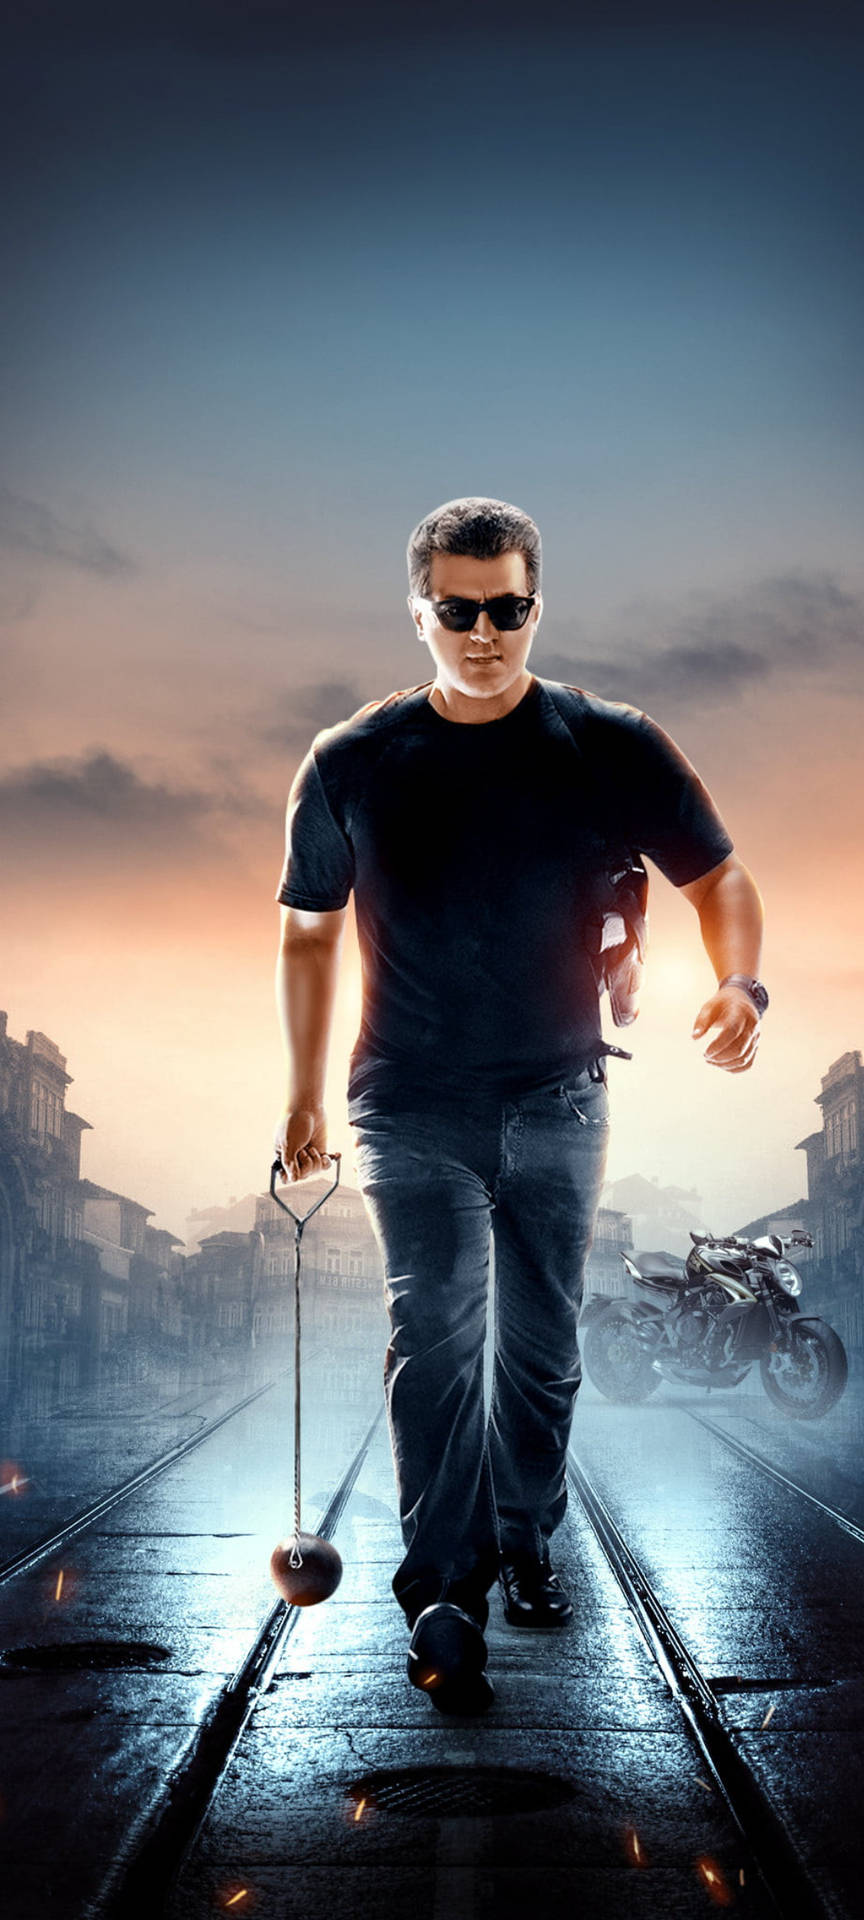 Thala Ajith Cool Poster Background